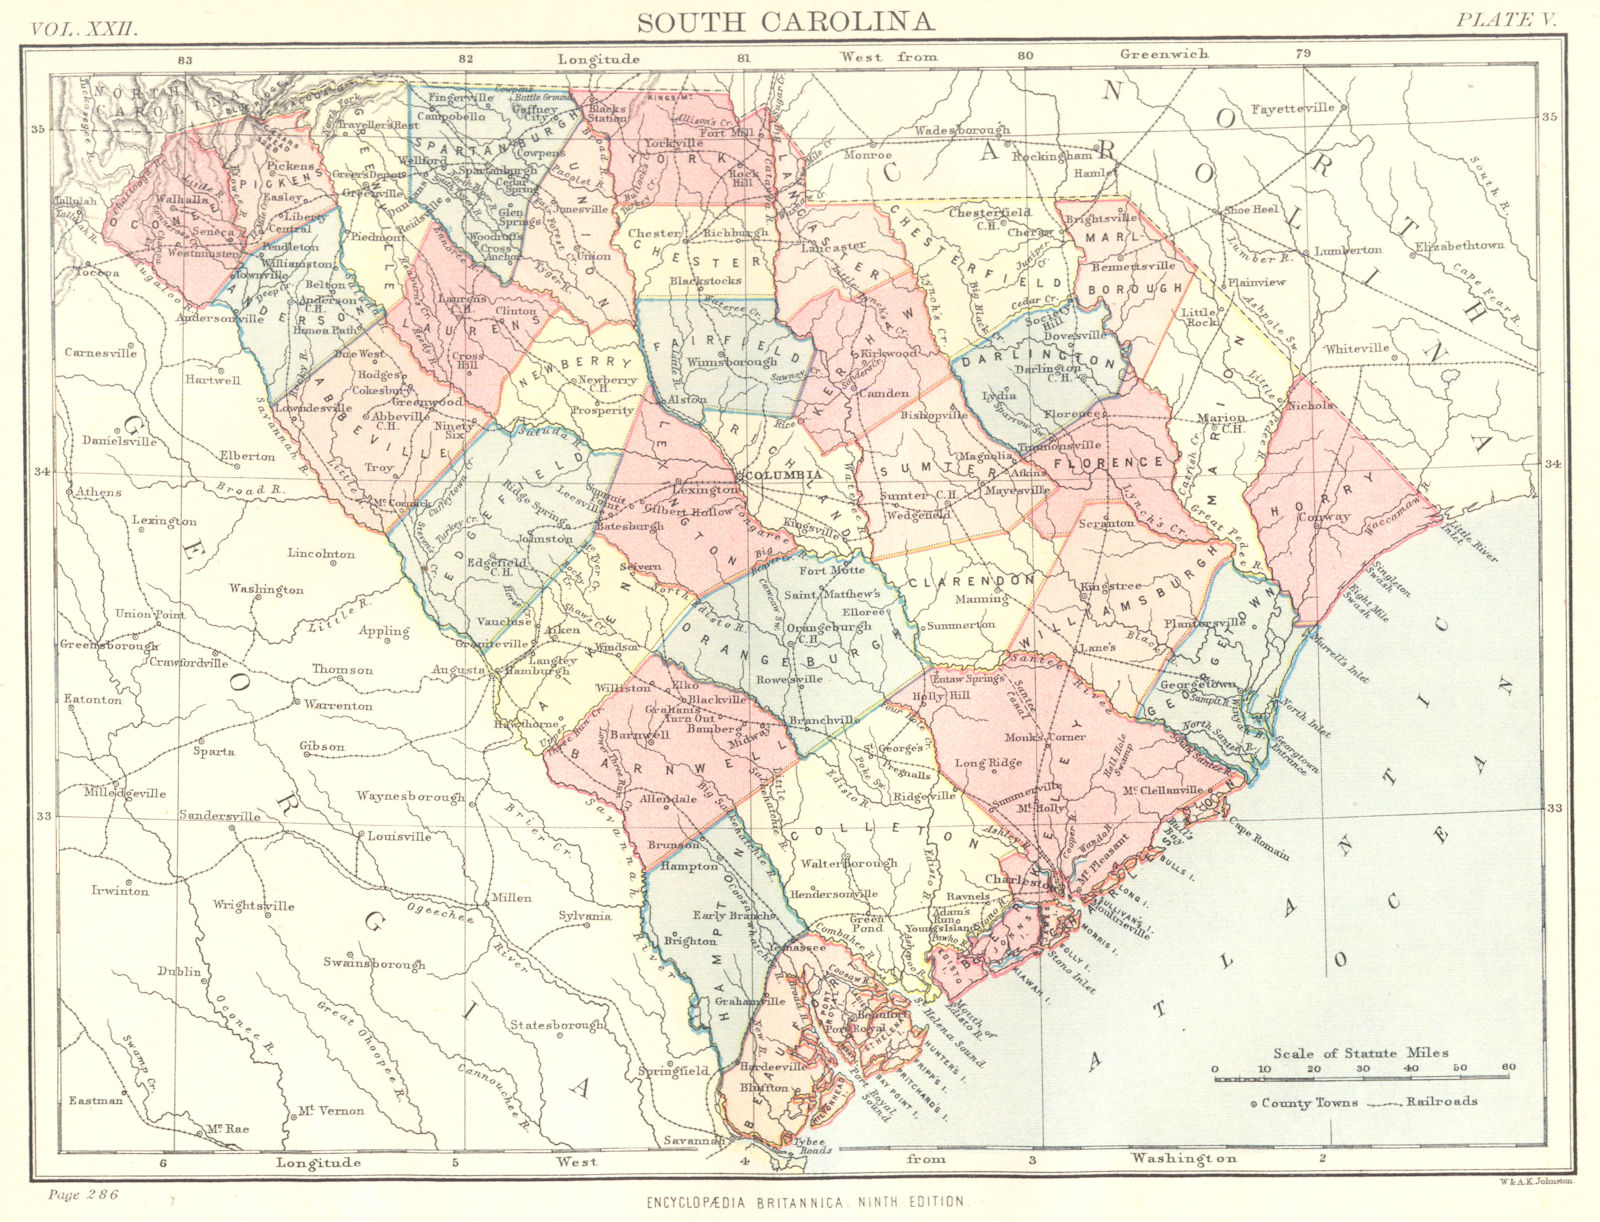 SOUTH CAROLINA. State map showing counties. Britannica 9th edition 1898